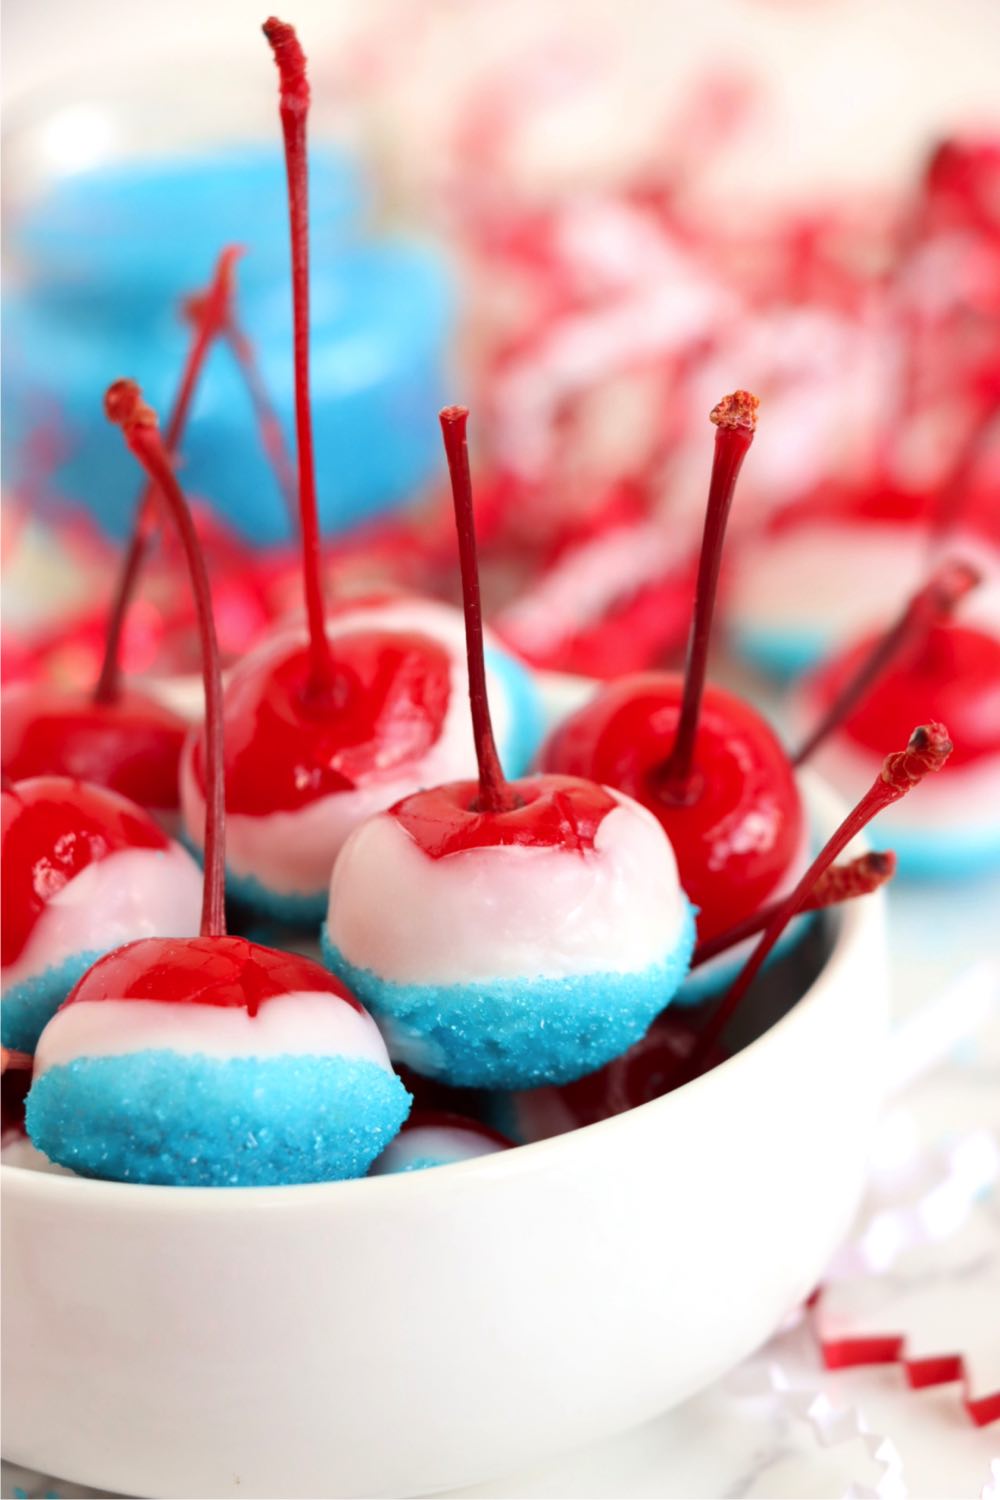 Small white bowl holding cherries dipped in white chocolate and blue sprinkles.